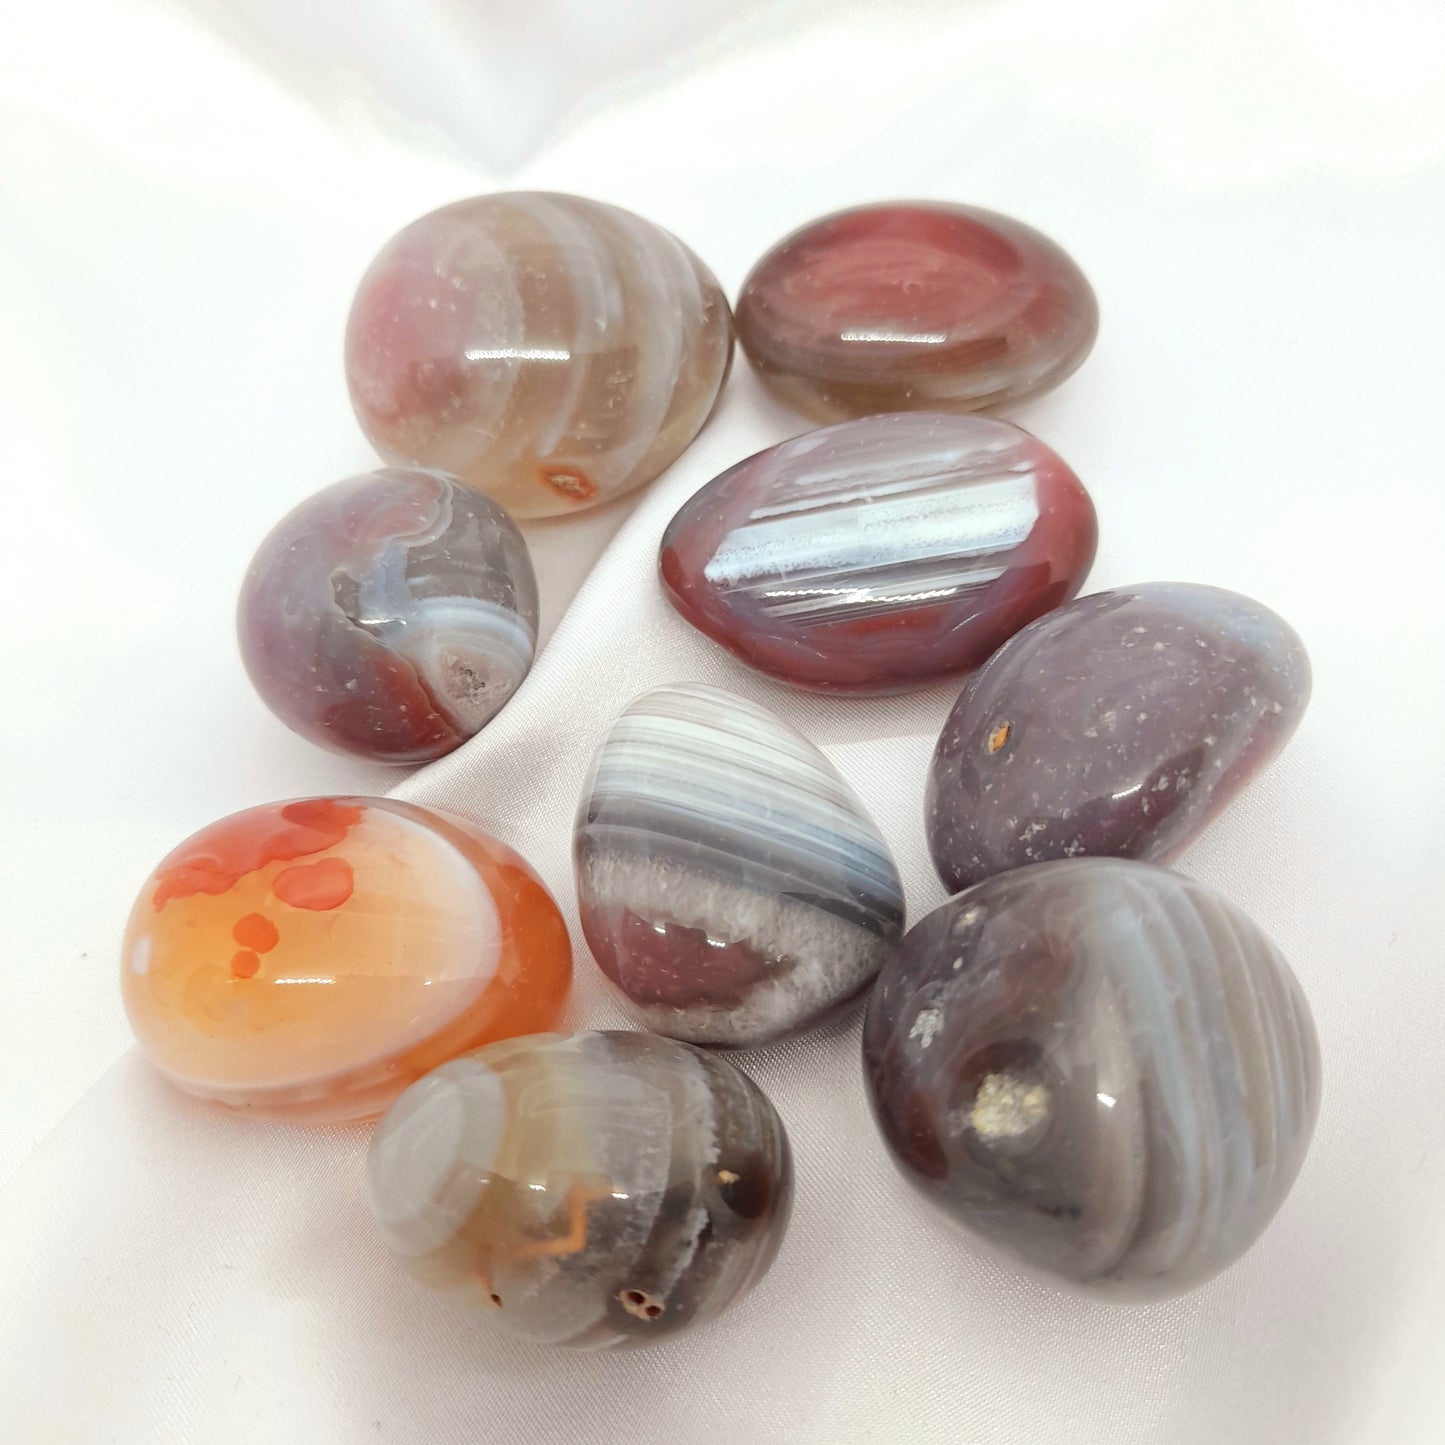 Botswana Agate Tumble - Comforting Crystal for Grief Relief - Varied Colors, Protection, and Grounding Energy 